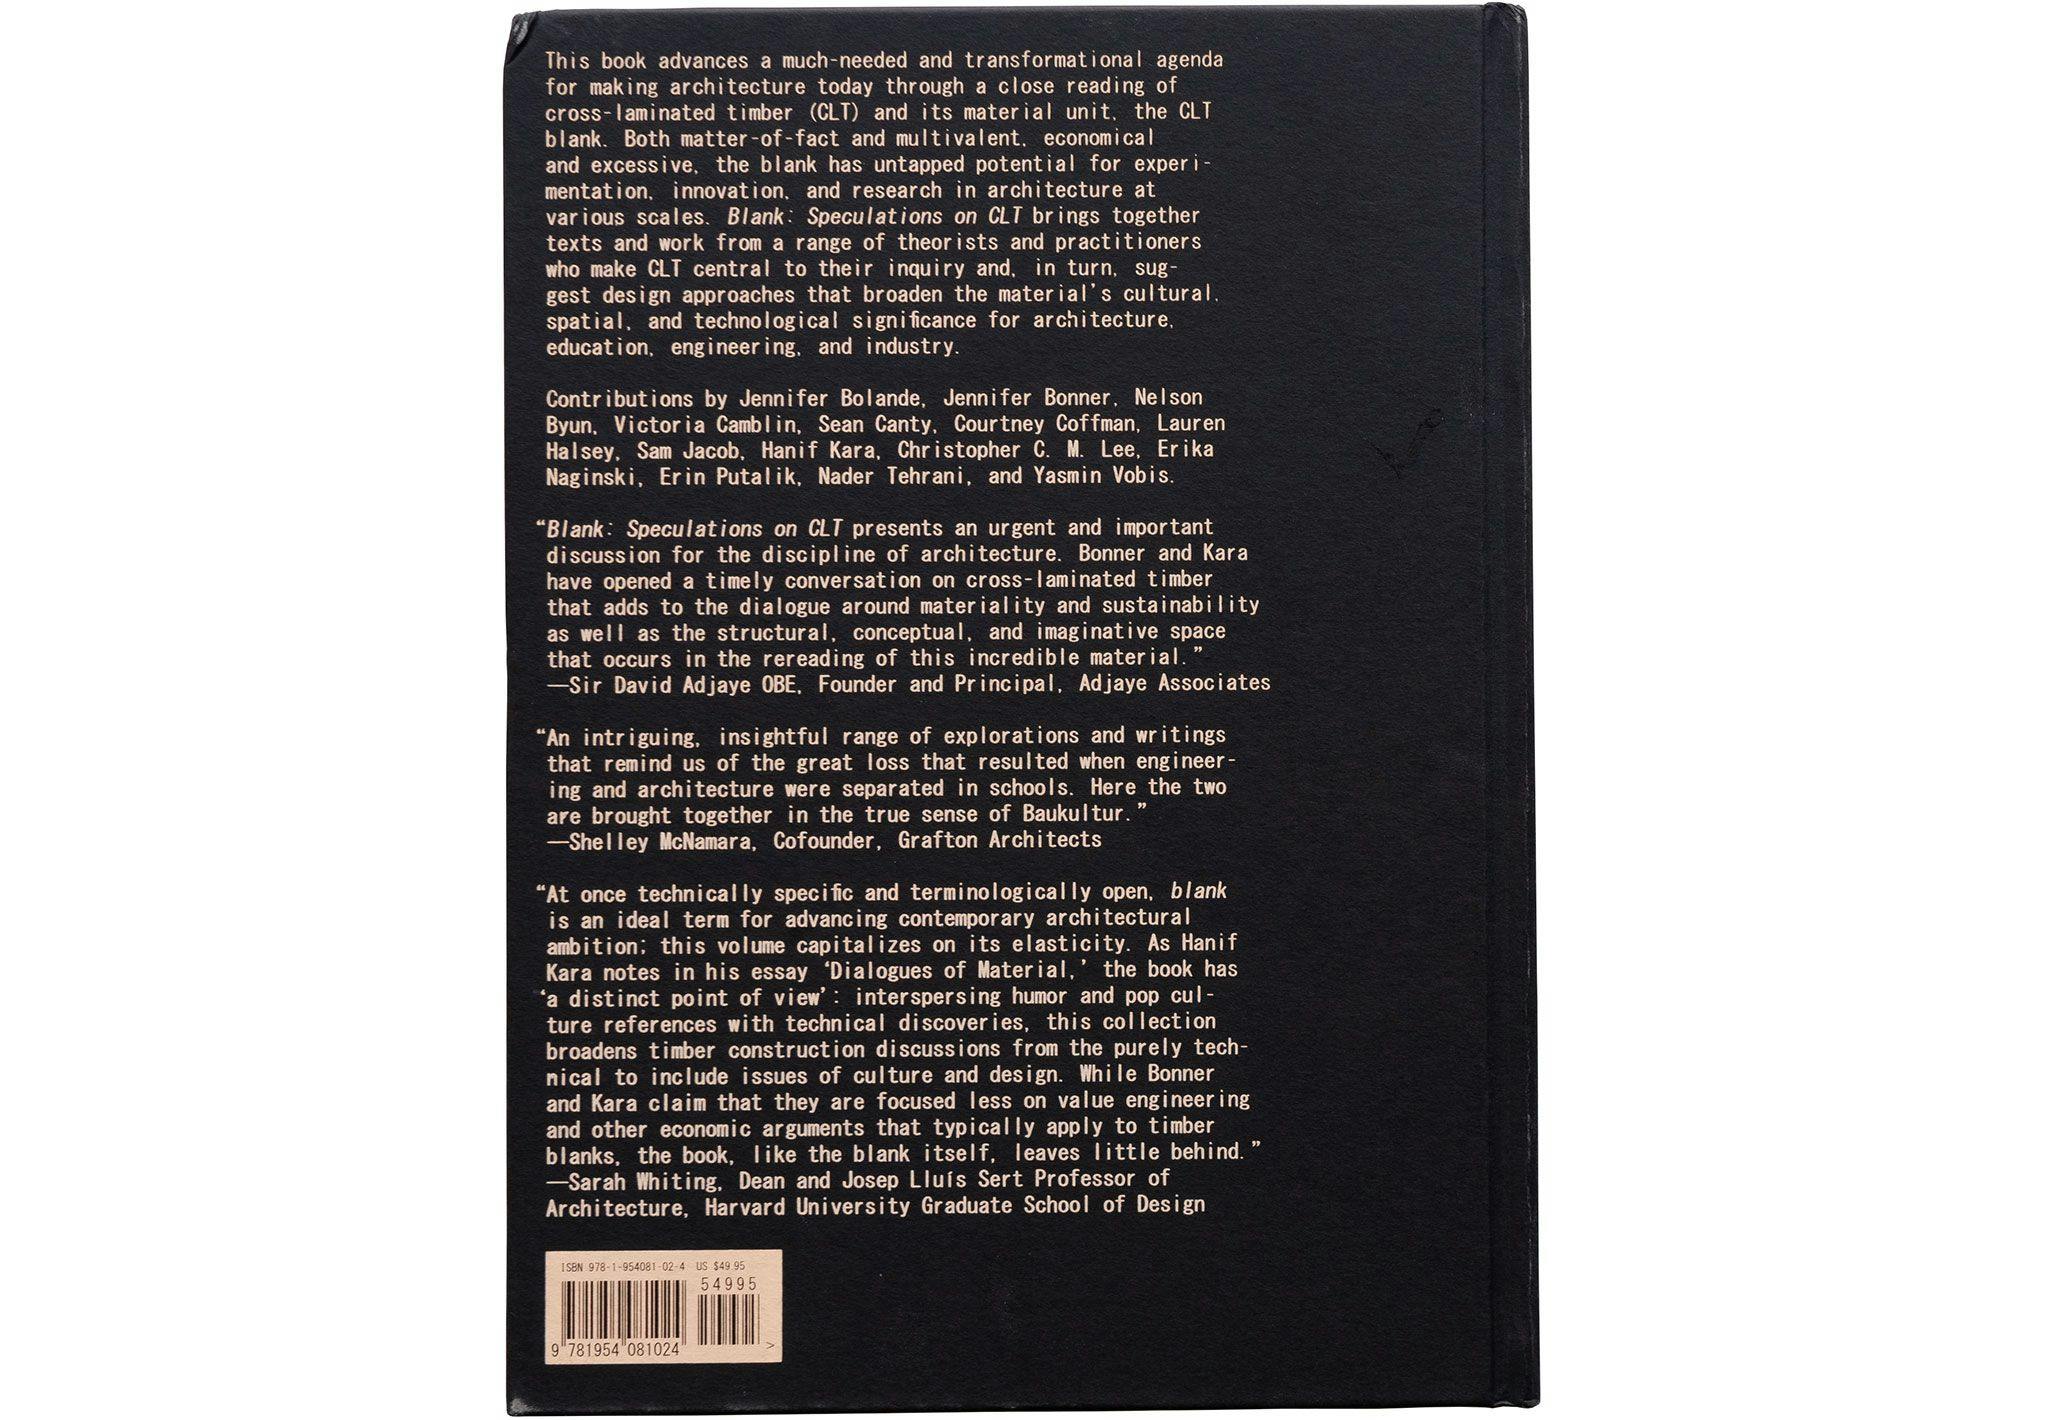 Blank back cover